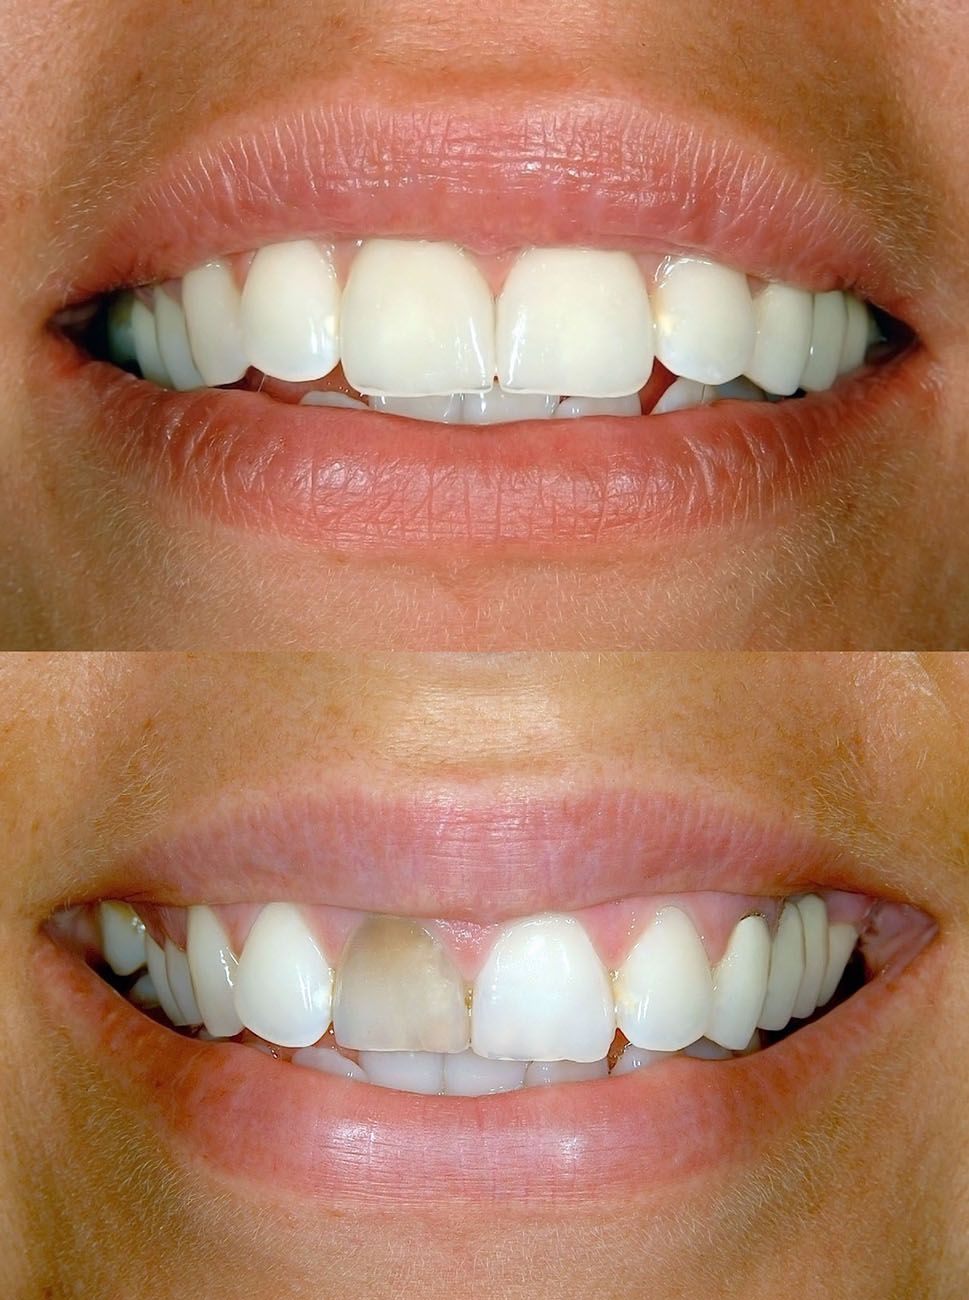 Before and after tooth bonding cosmetic dental procedure dentist in Strongsville Ohio